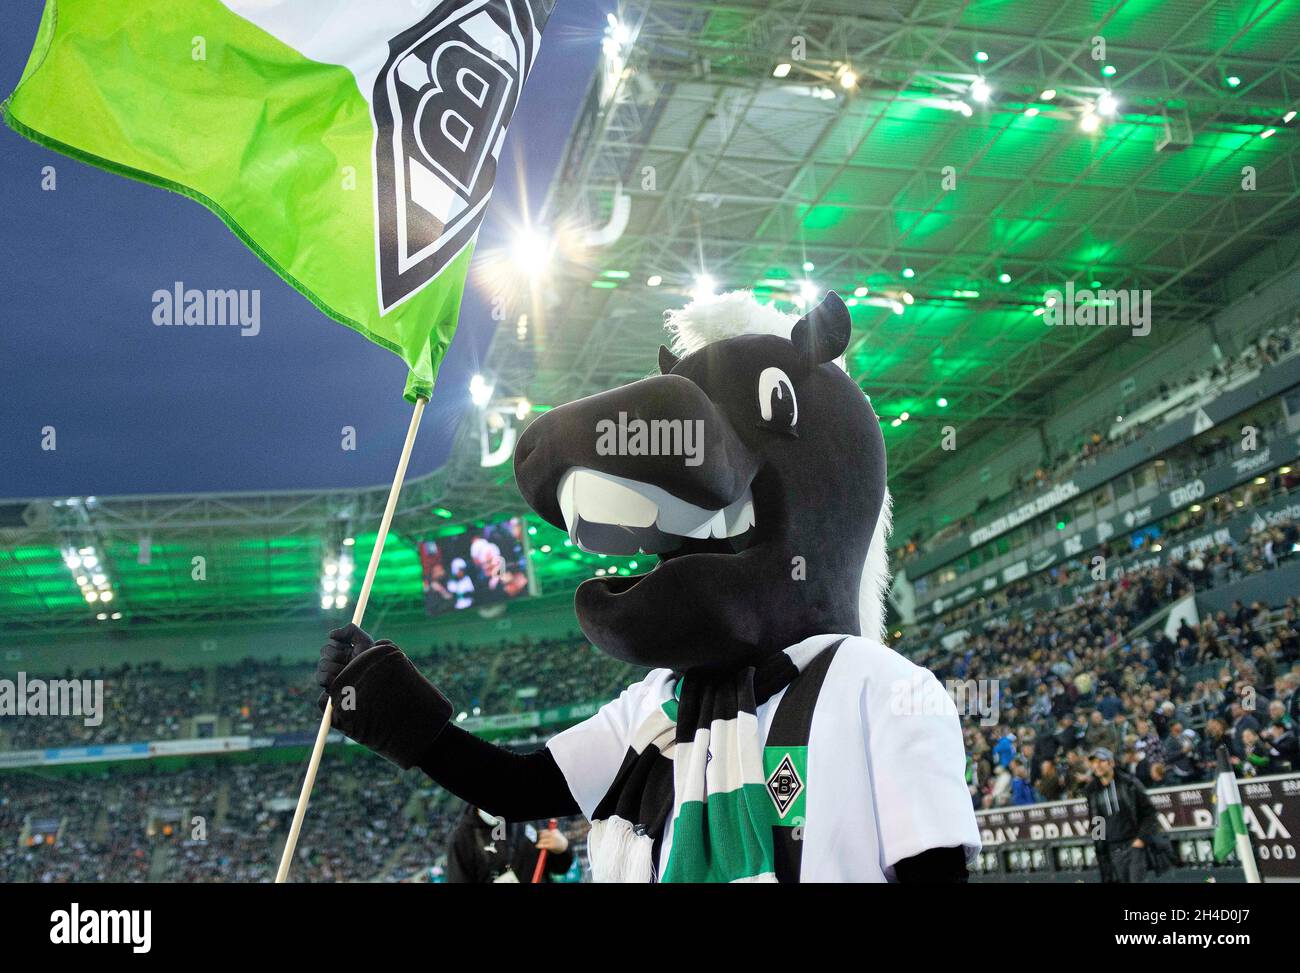 Feature, mascot Juenter the foal, JÃ nter, Borussia-Park football 1. Bundesliga, 10th matchday, Borussia Monchengladbach (MG) - VfL Bochum (BO) 2: 1, on October 31, 2021 in Borussia Monchengladbach/Germany. #DFL regulations prohibit any use of photographs as image sequences and/or quasi-video # Â Stock Photo